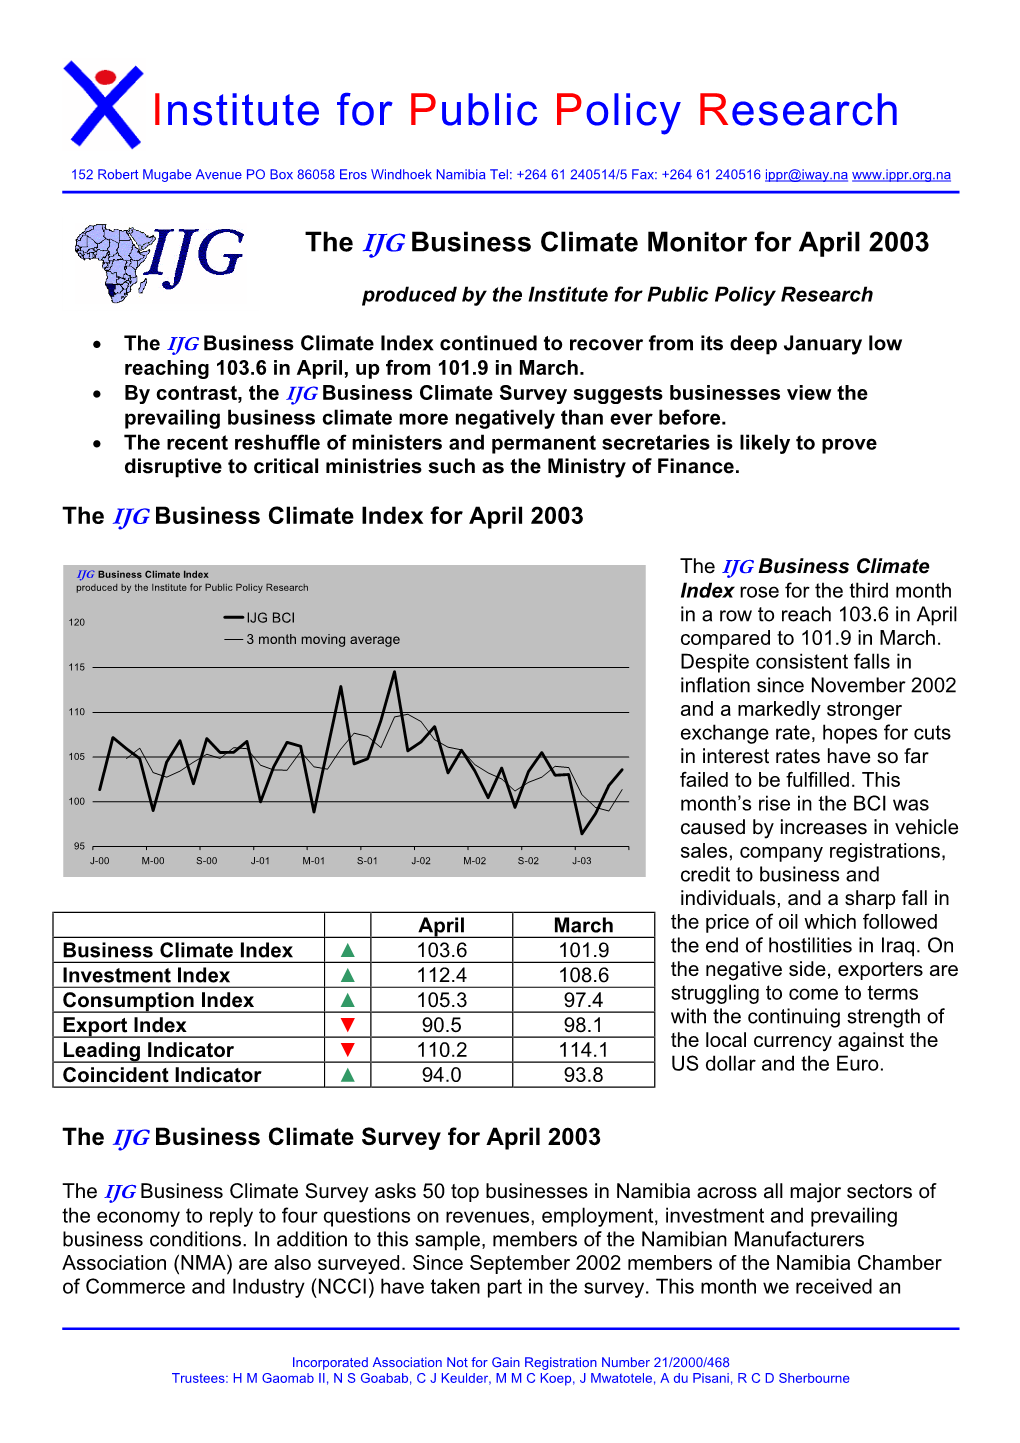 The IJG Business Climate Monitor for April 2003